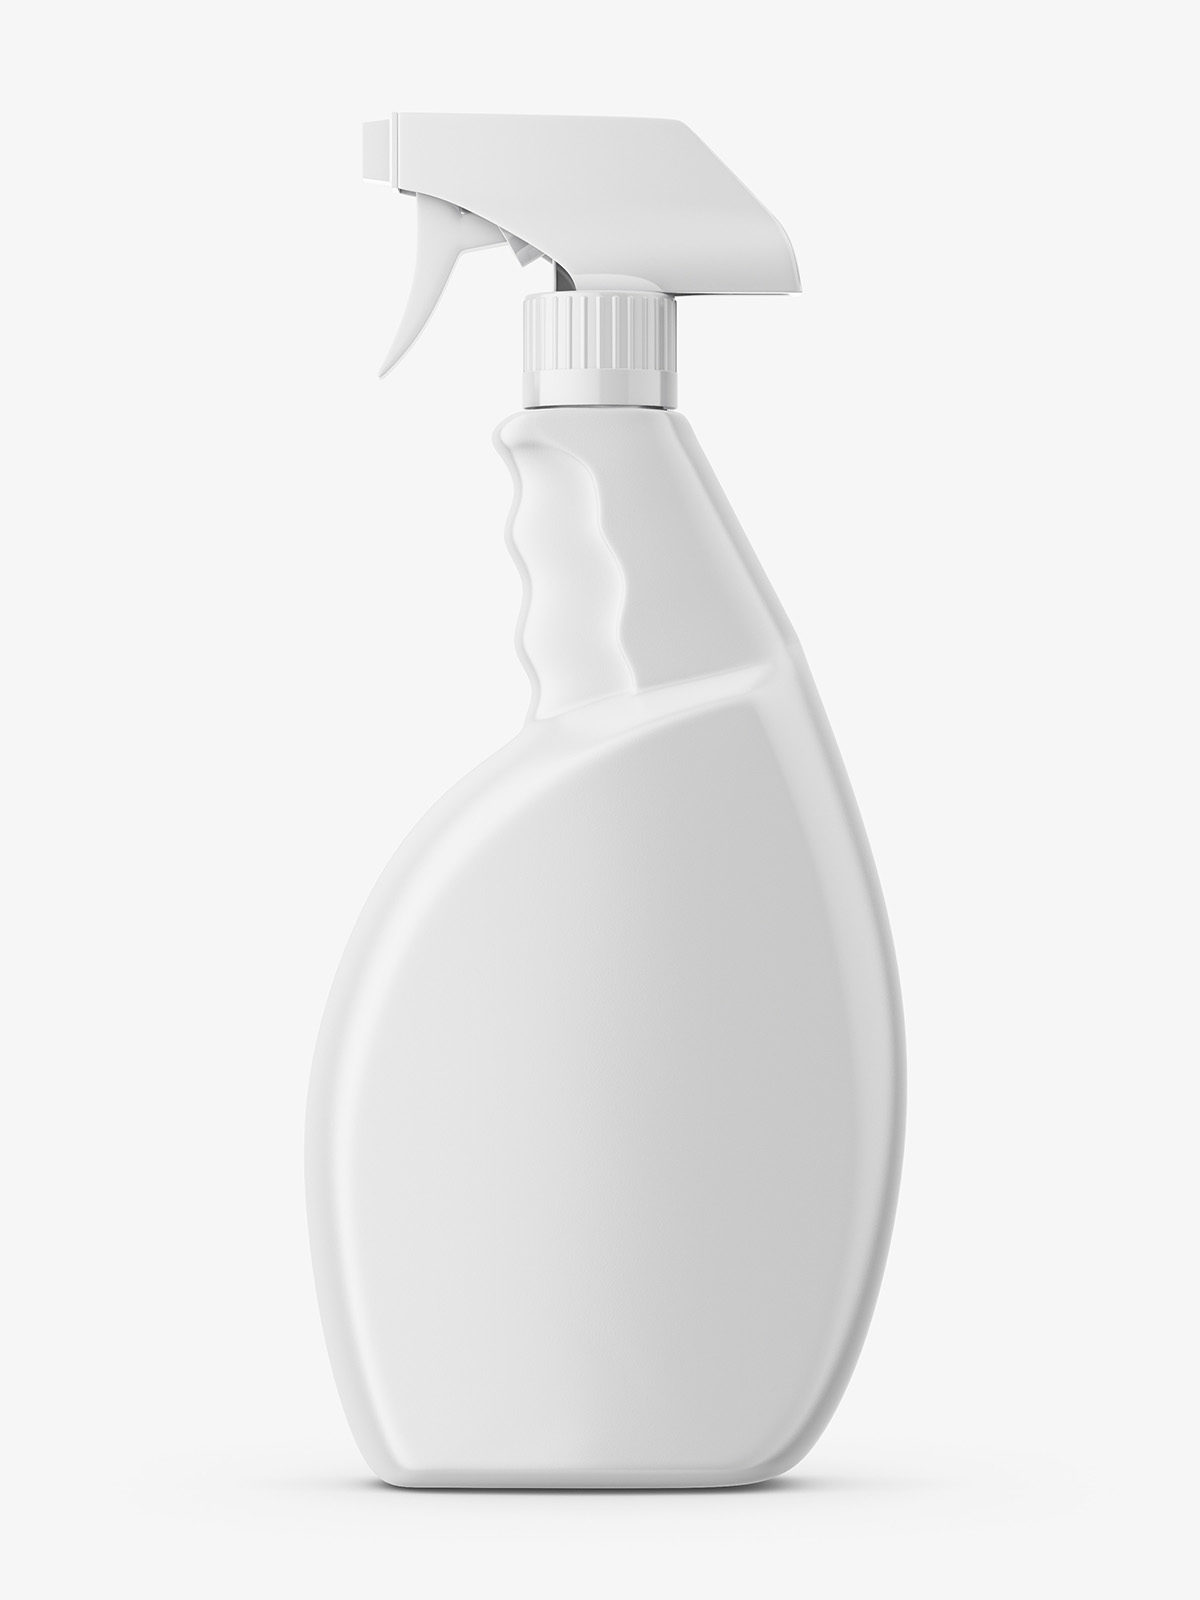 Download 160+ Spray Bottle Mockup Yellowimages